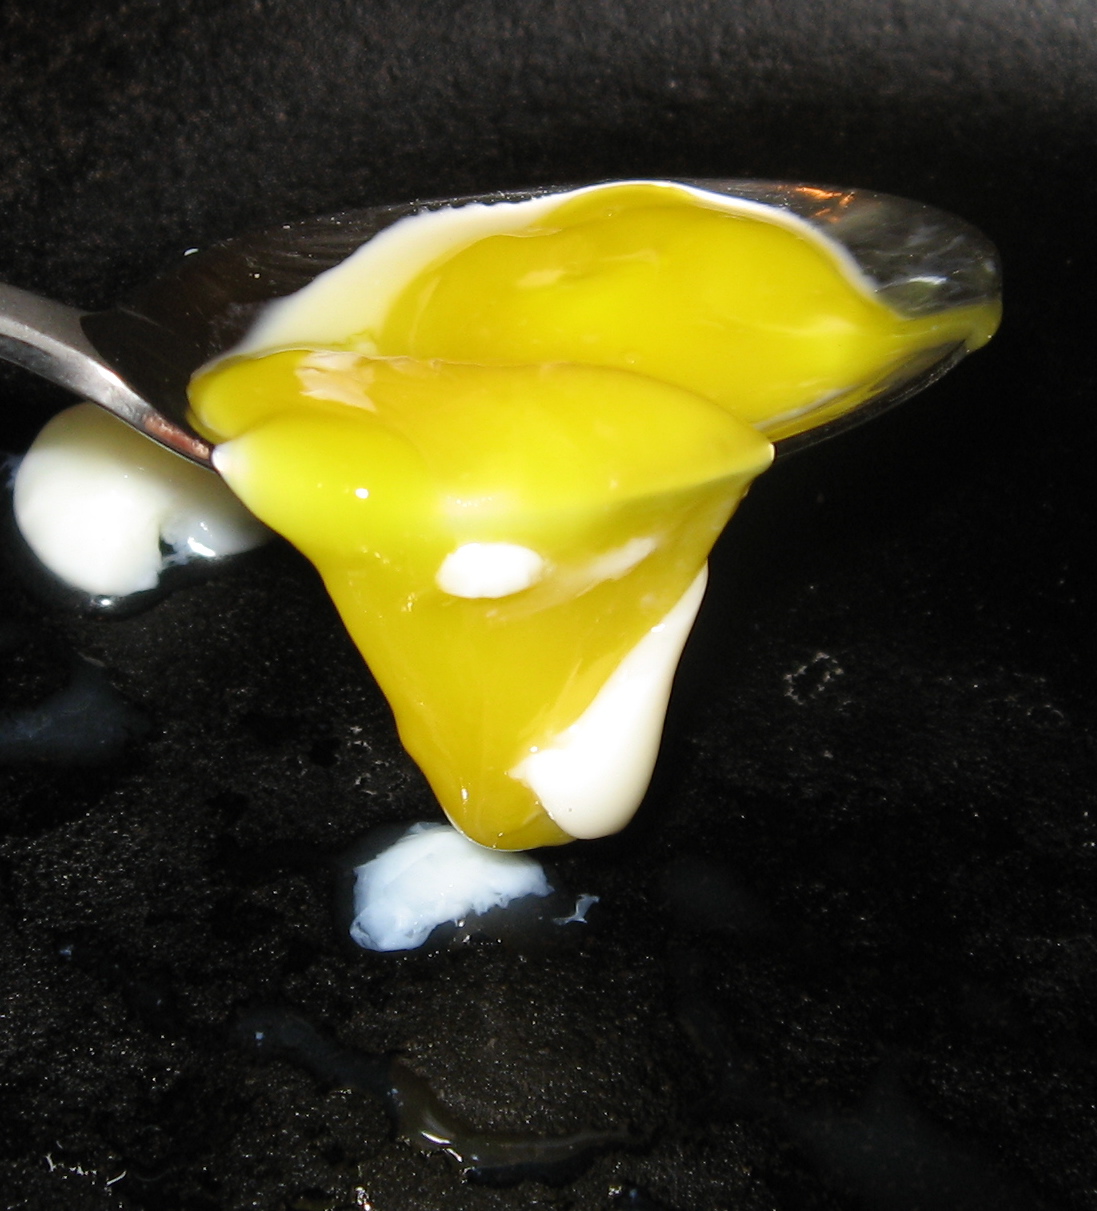 spoon pouring melted cheese on black surface for cooking